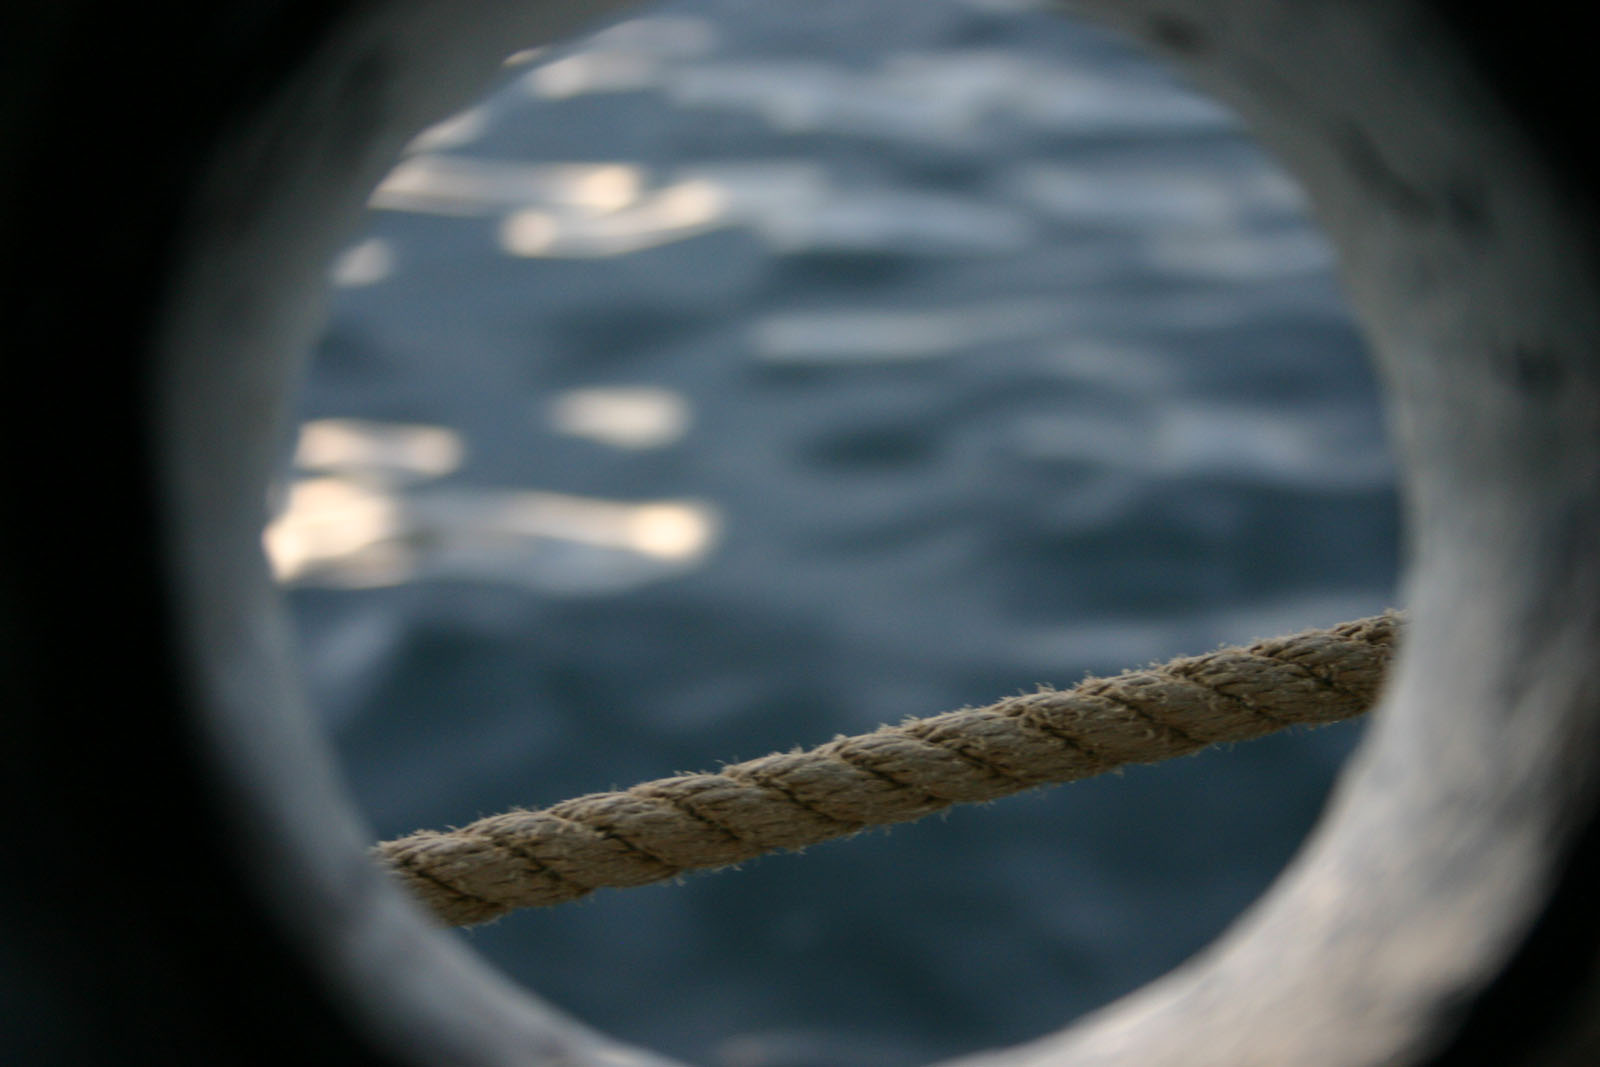 Ropes running across the hull of the ship